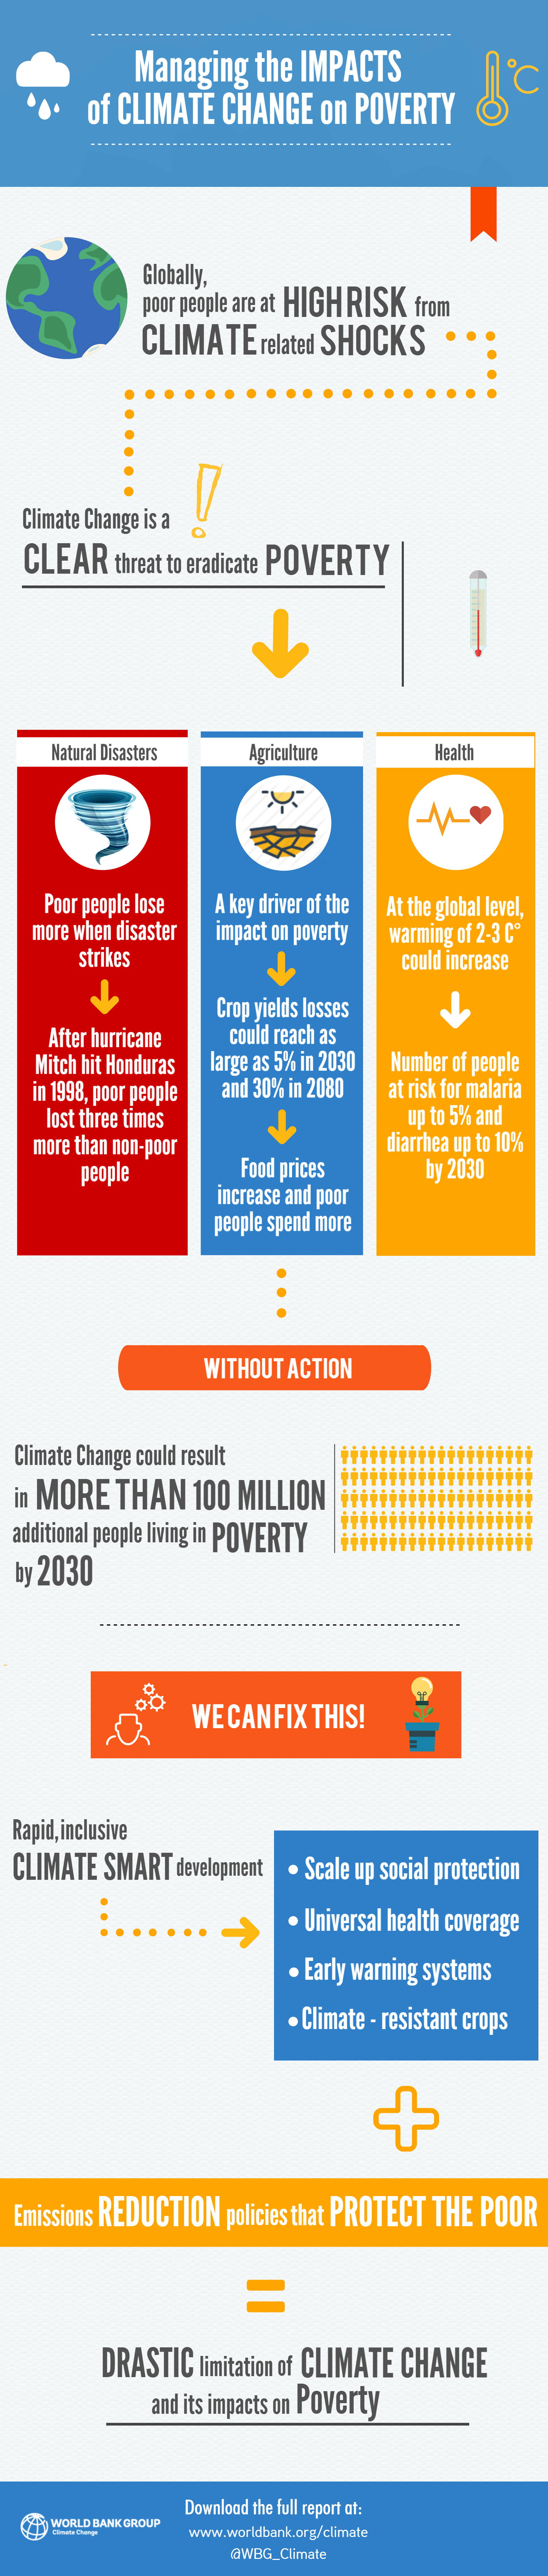 An infographic depicting the World Bank's report and prediction of 100 million people who could suffer from extreme poverty due to the effects of global climate change.